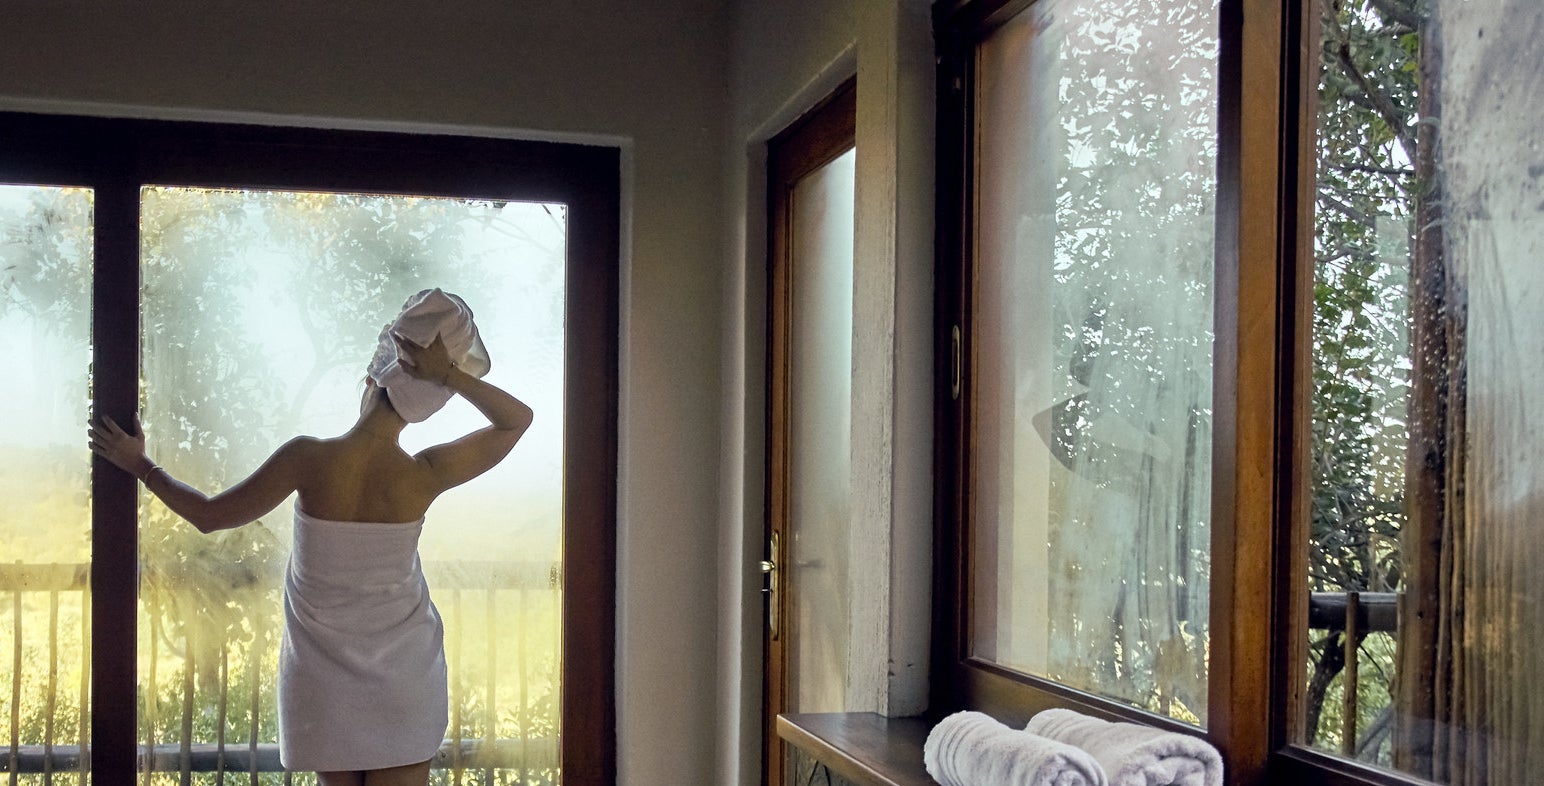 Woman wrapped in towel after bath looks out window